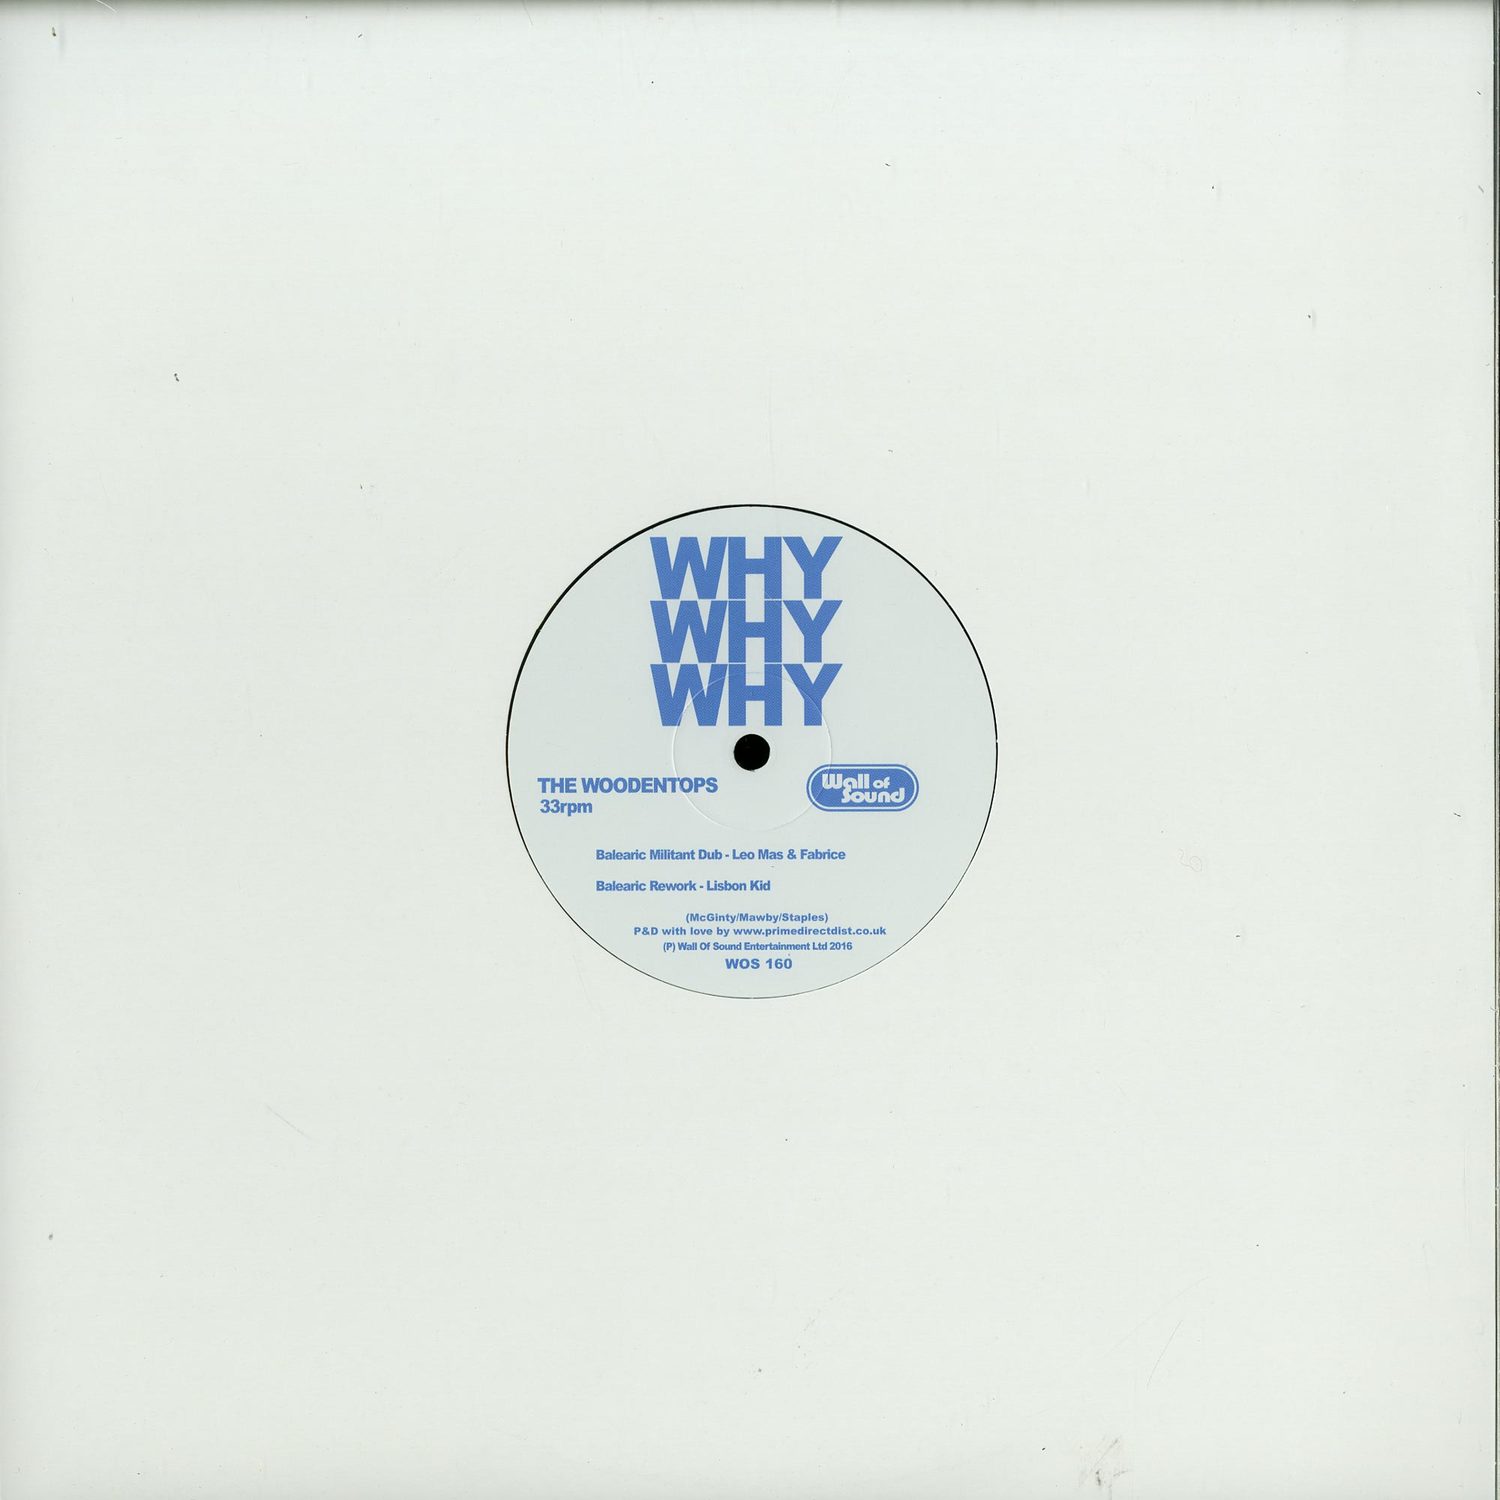 The Woodentops - WHY WHY WHY REMIXES